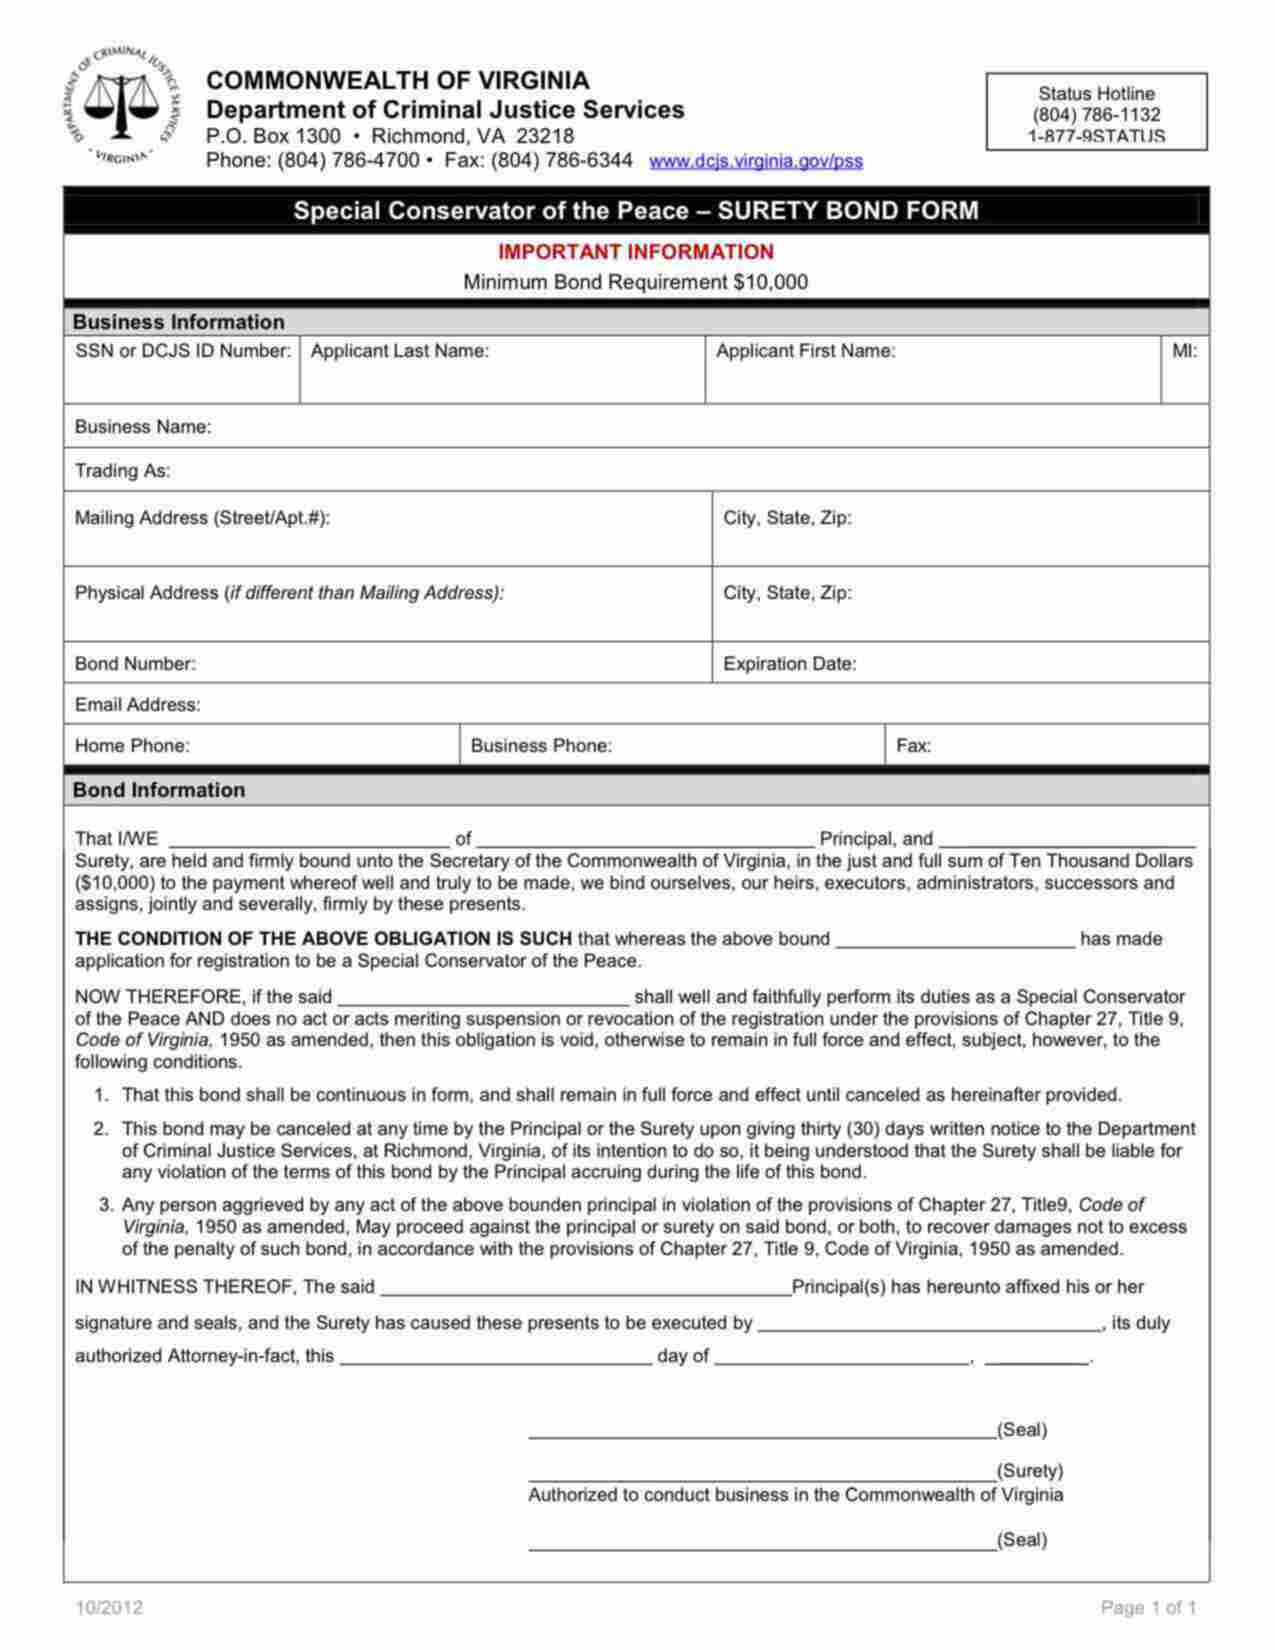 Virginia Special Conservator of the Peace Bond Form